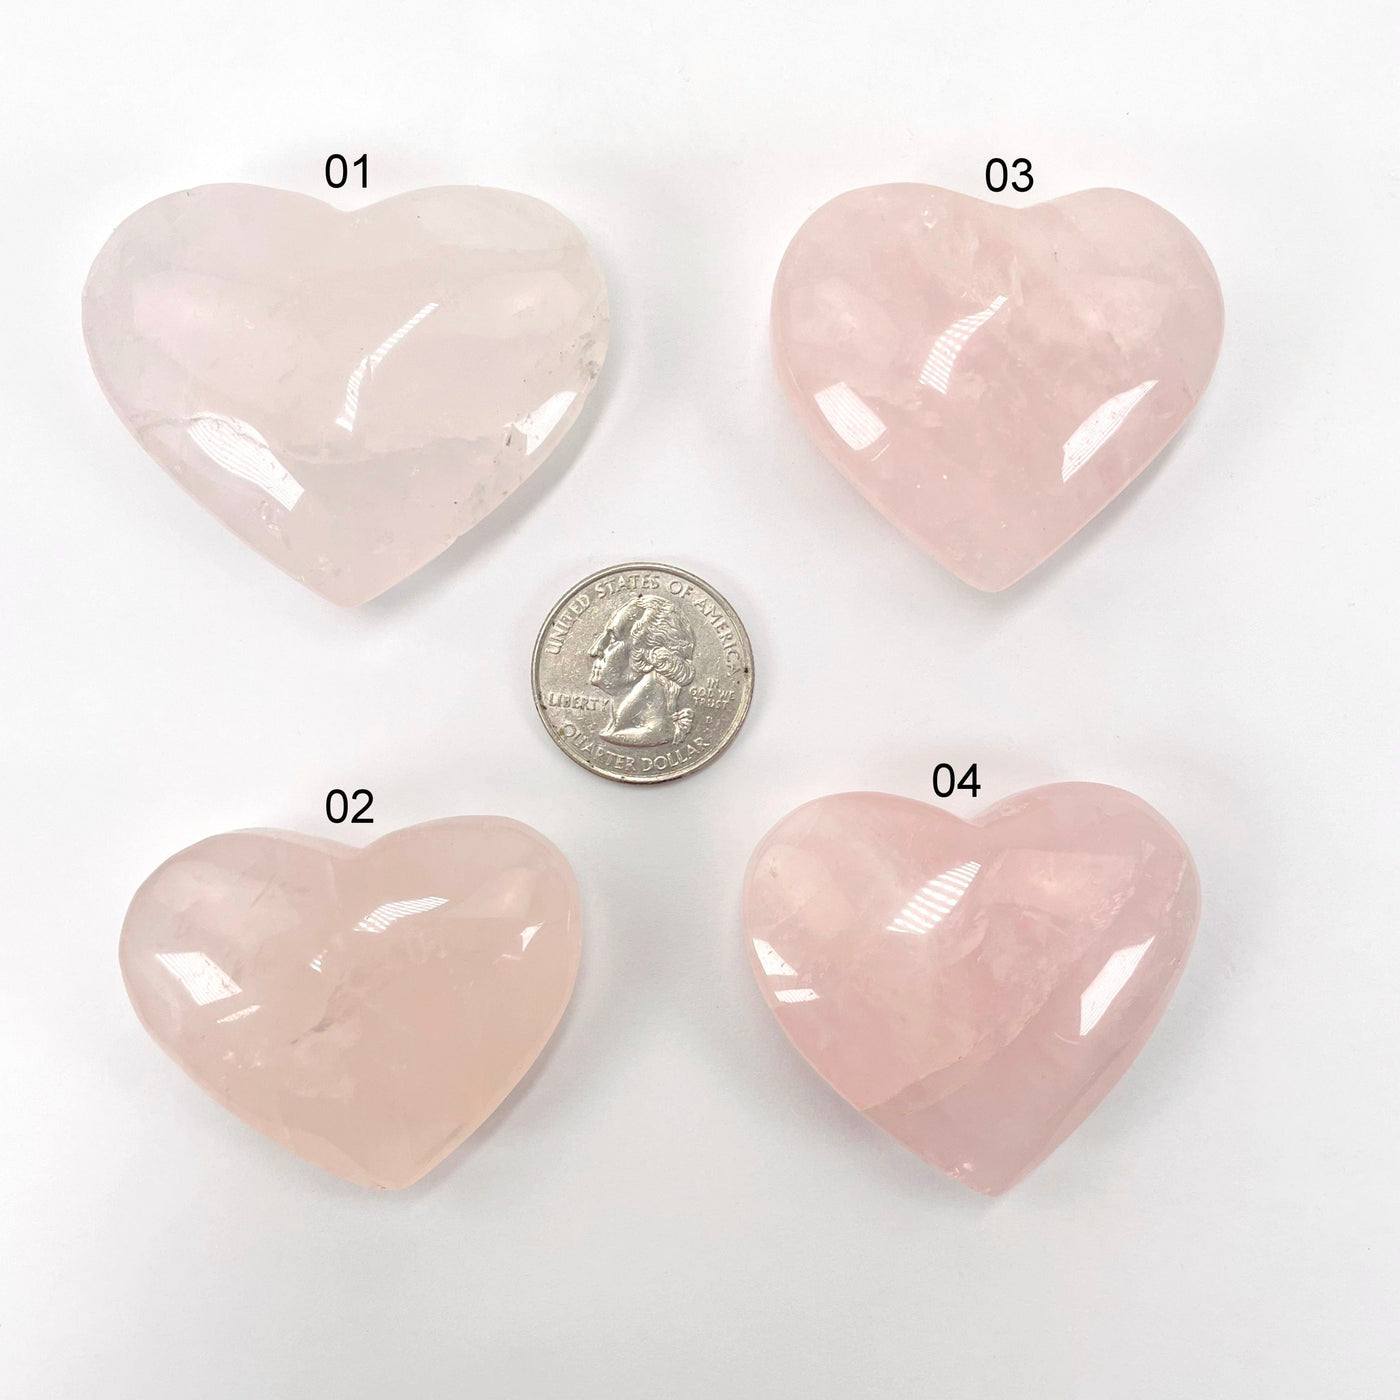 rose quartz polished hearts with quarter for size reference